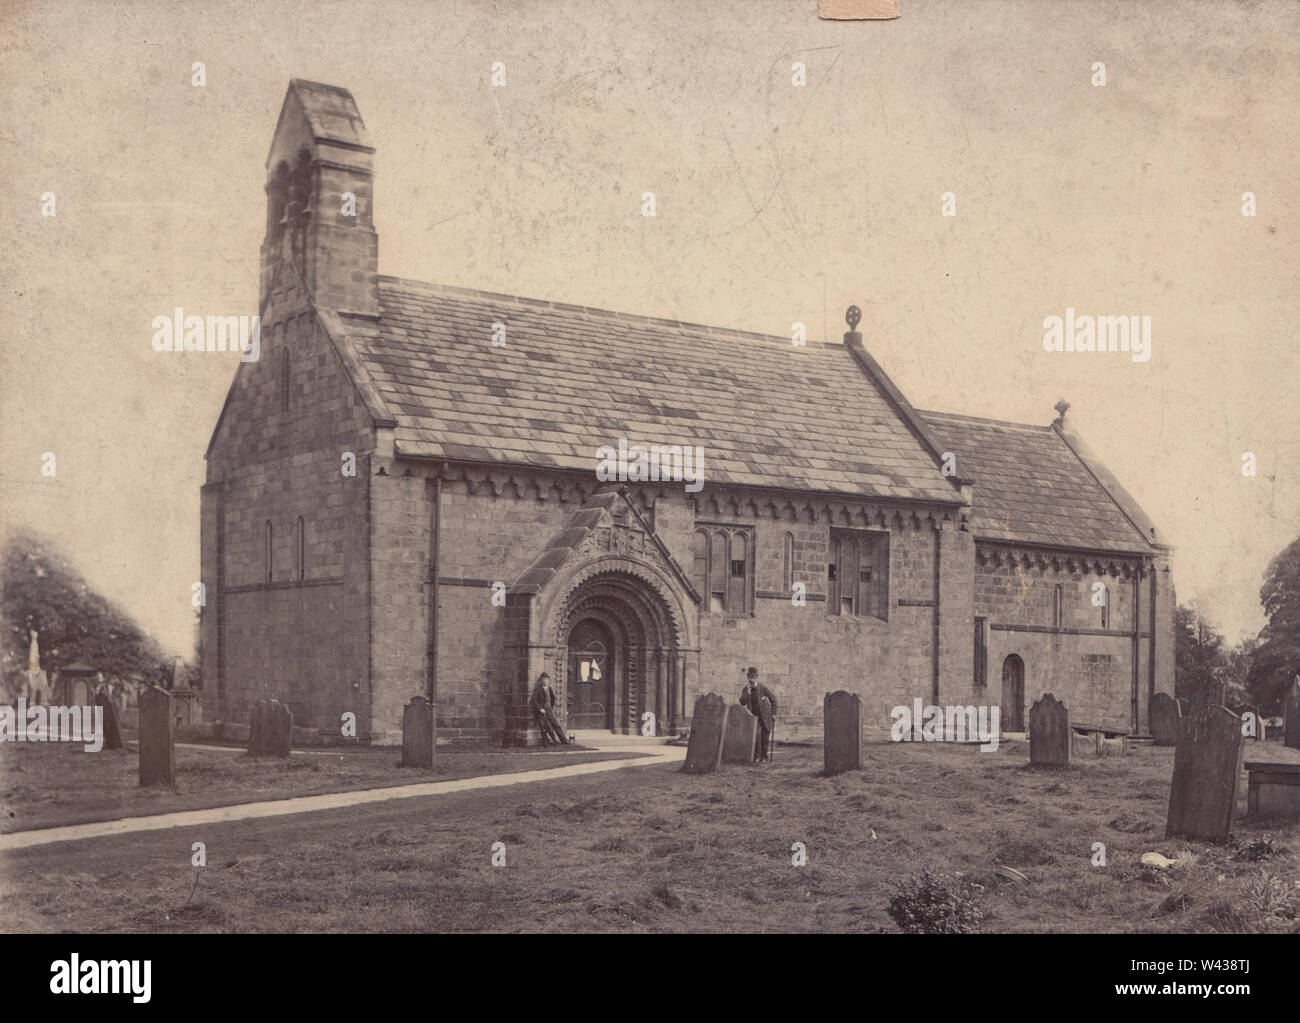 Victorian Photograph of Two Gentlemen Stood Outside The Church of Saint John the Baptist in Adel, Leeds, West Yorkshire, England. Stock Photo